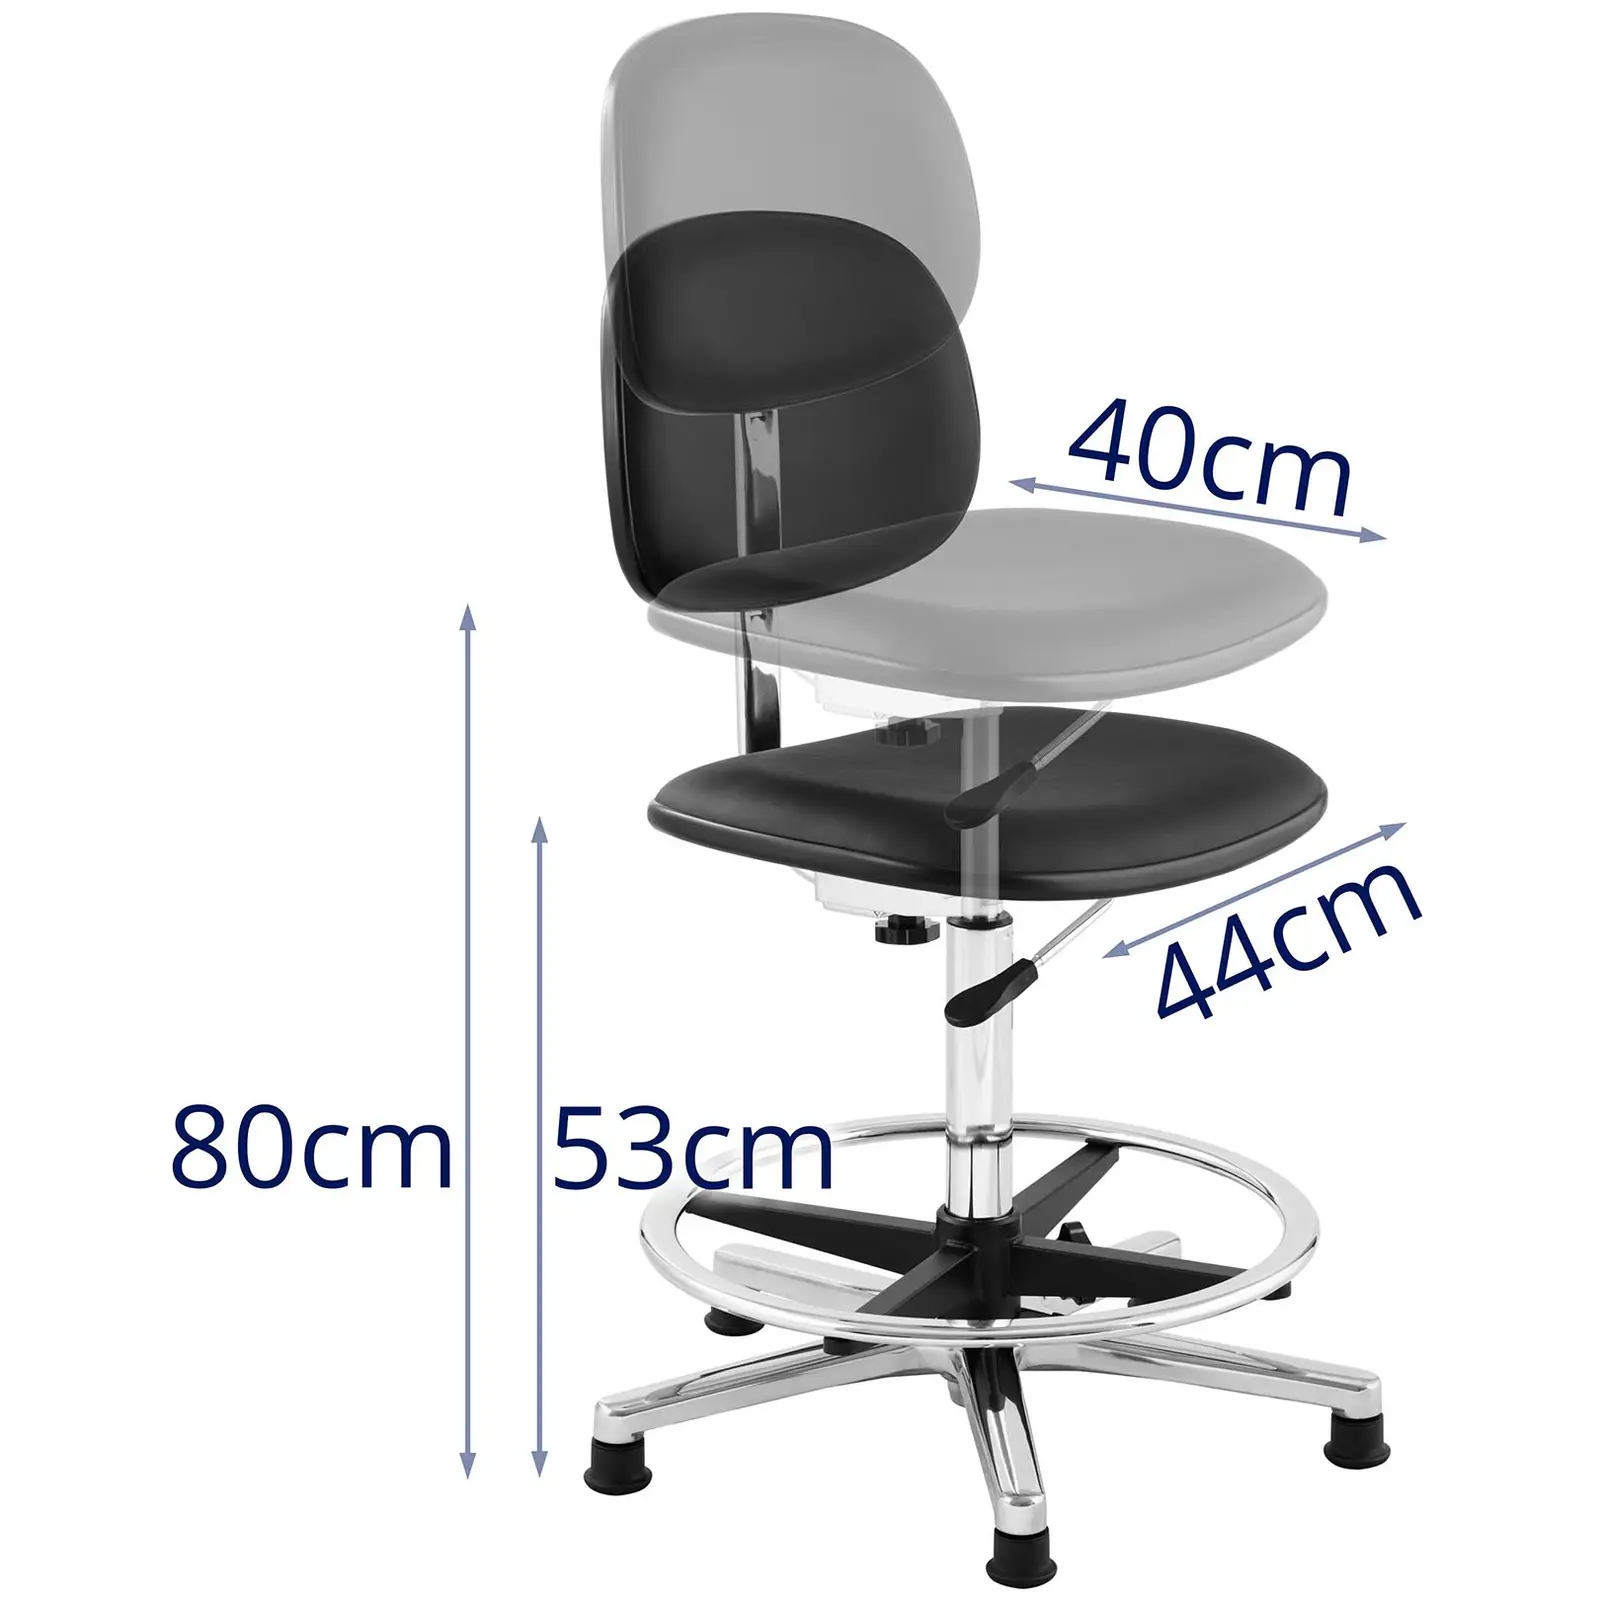 Factory second Swivel stool - 120 kg - Black - foot ring - height adjustable from 530 - 800 mm